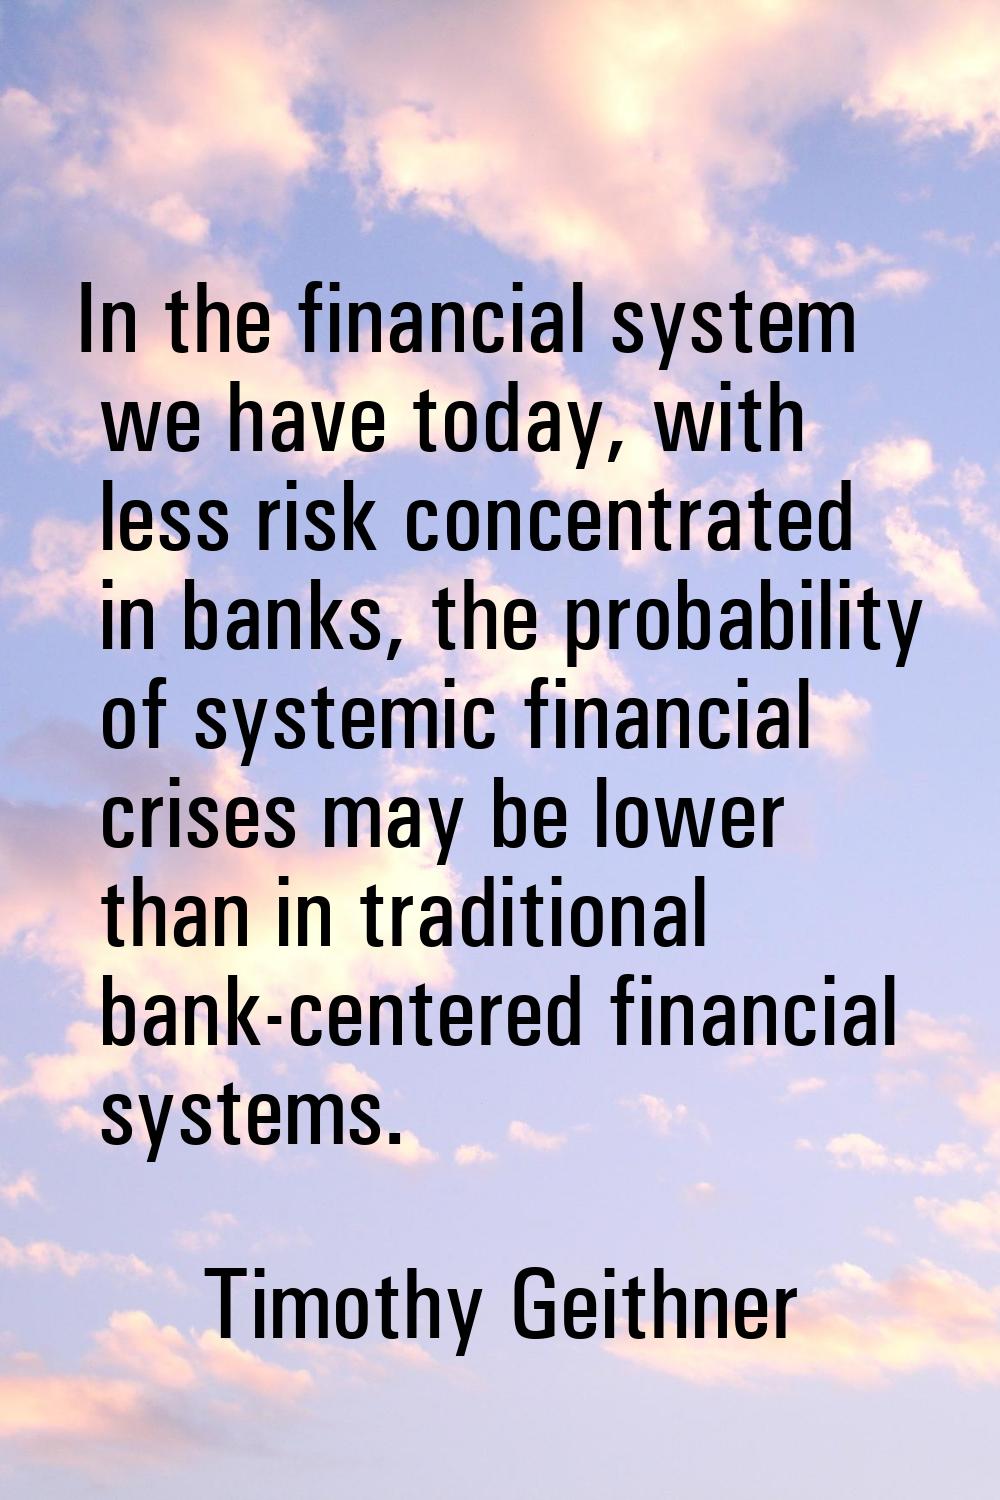 In the financial system we have today, with less risk concentrated in banks, the probability of sys